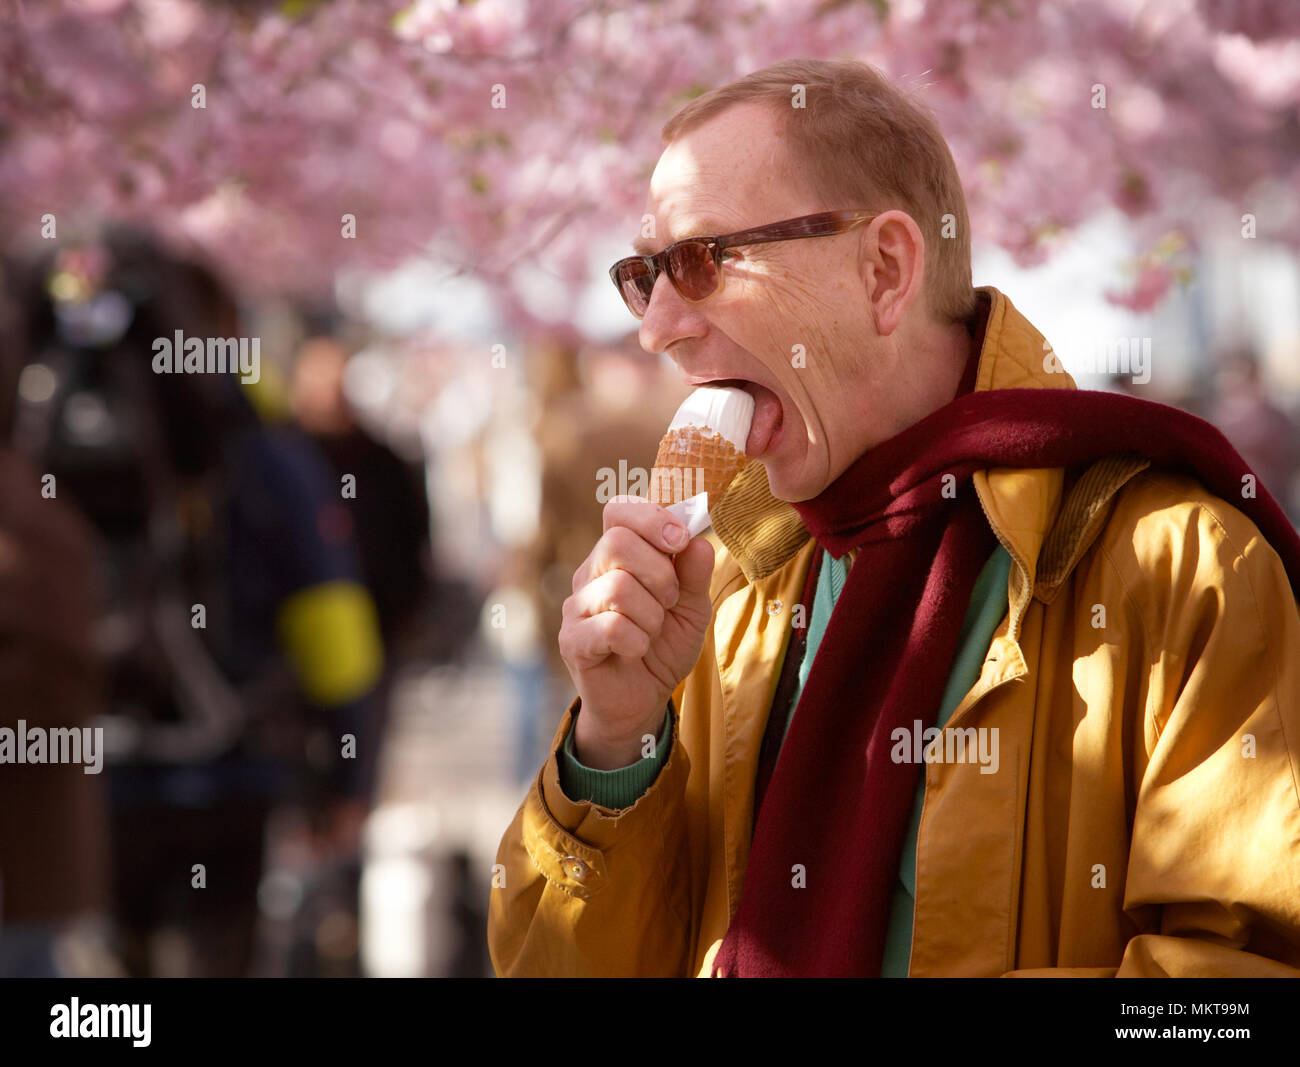 A man eats ice cream when the Japanese cherry trees blossom in the Royal park in Stockholm April 30, 2012 Stock Photo